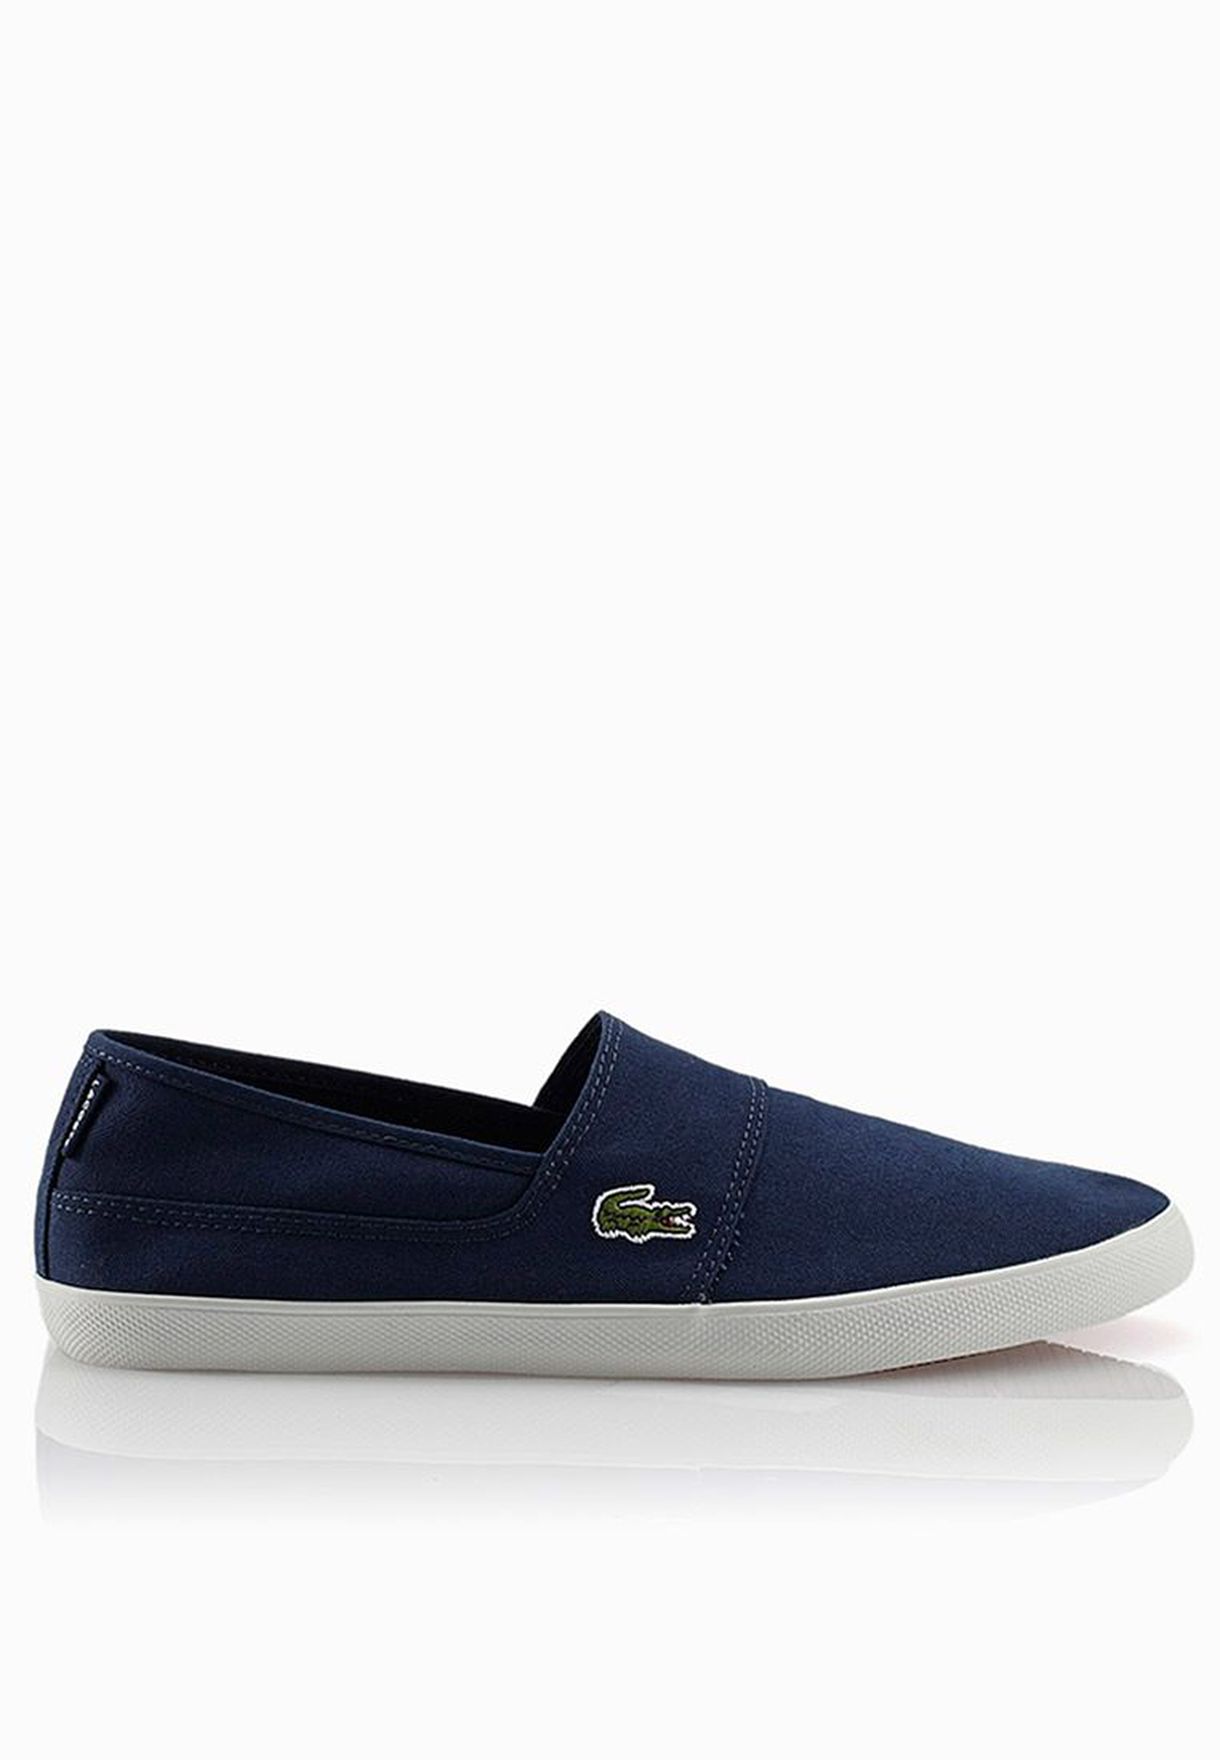 lcr loafer shoes